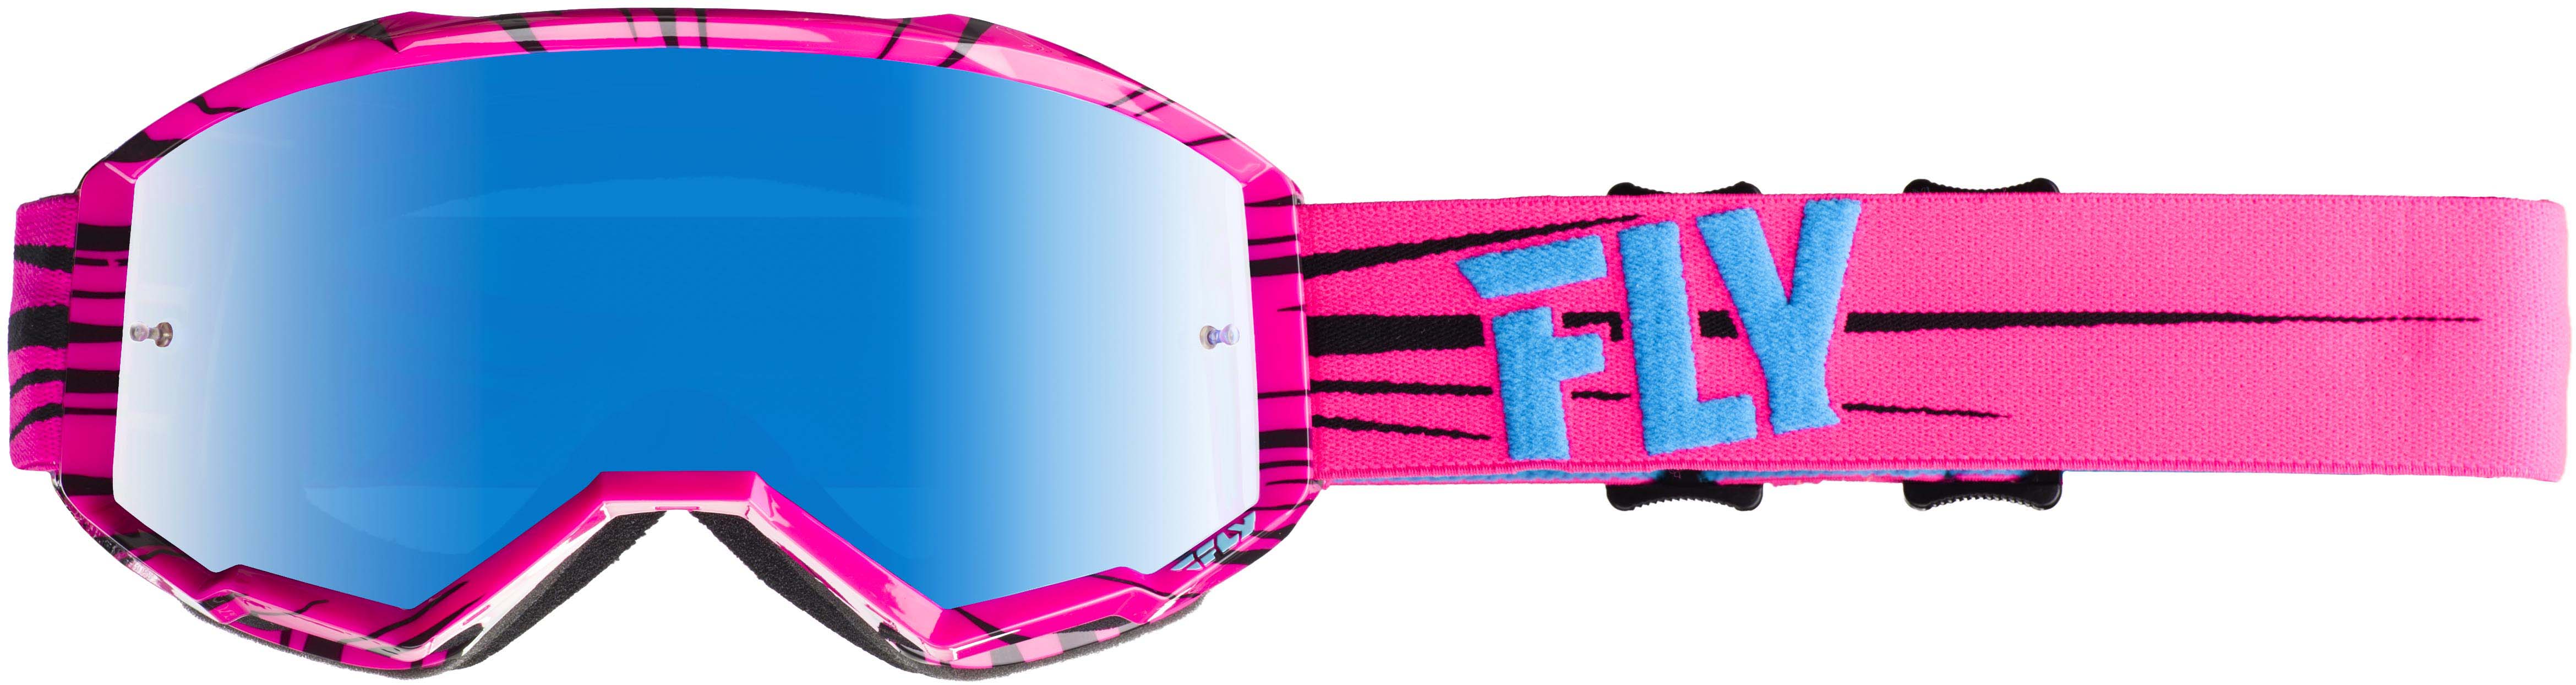 MC Auto: Fly Zone Pink/Teal/Sky Blue Mirror Goggle